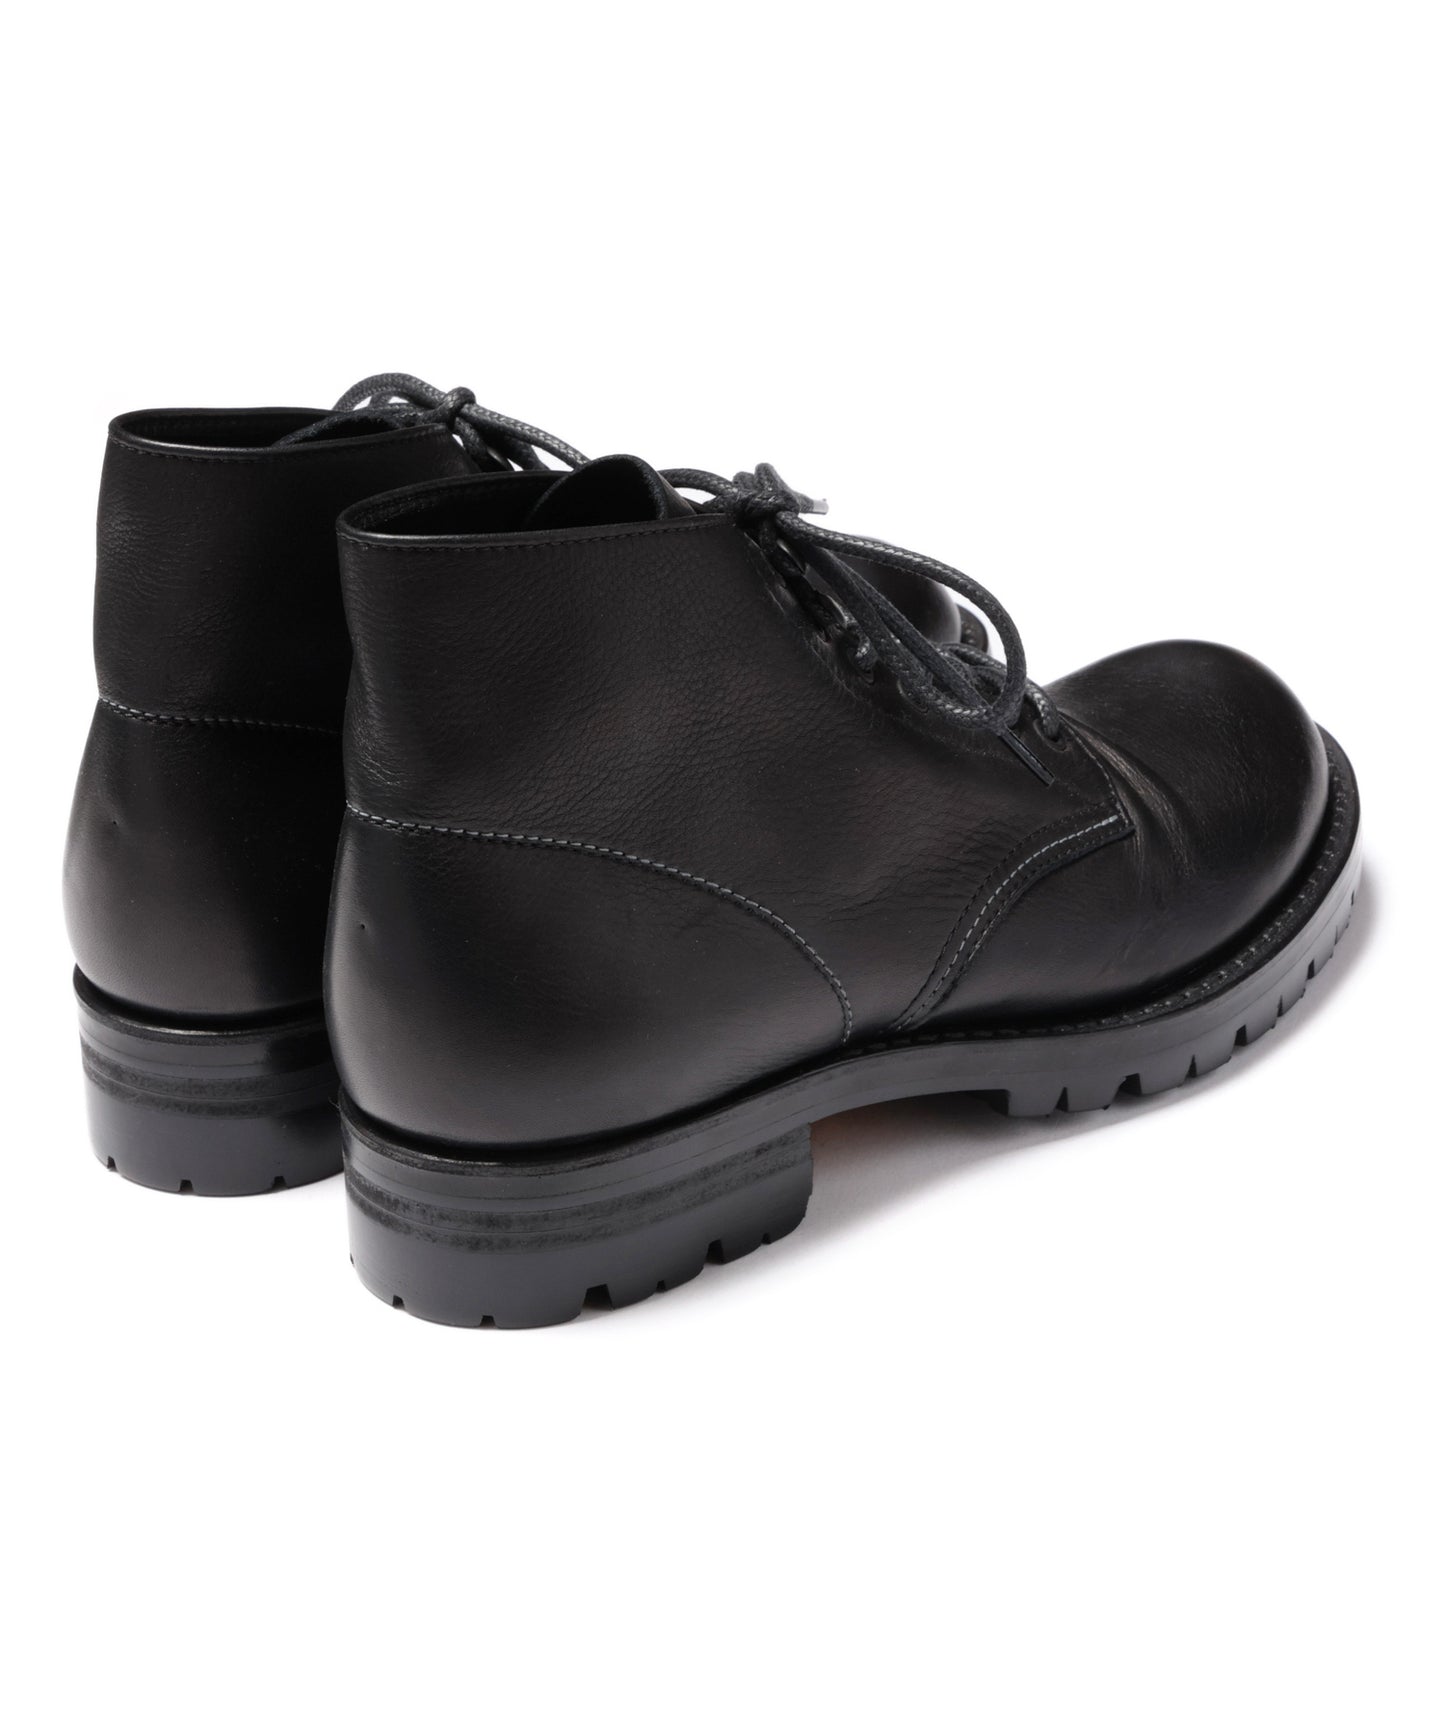 water proof shirink x vibram sole seven hole hunting boots